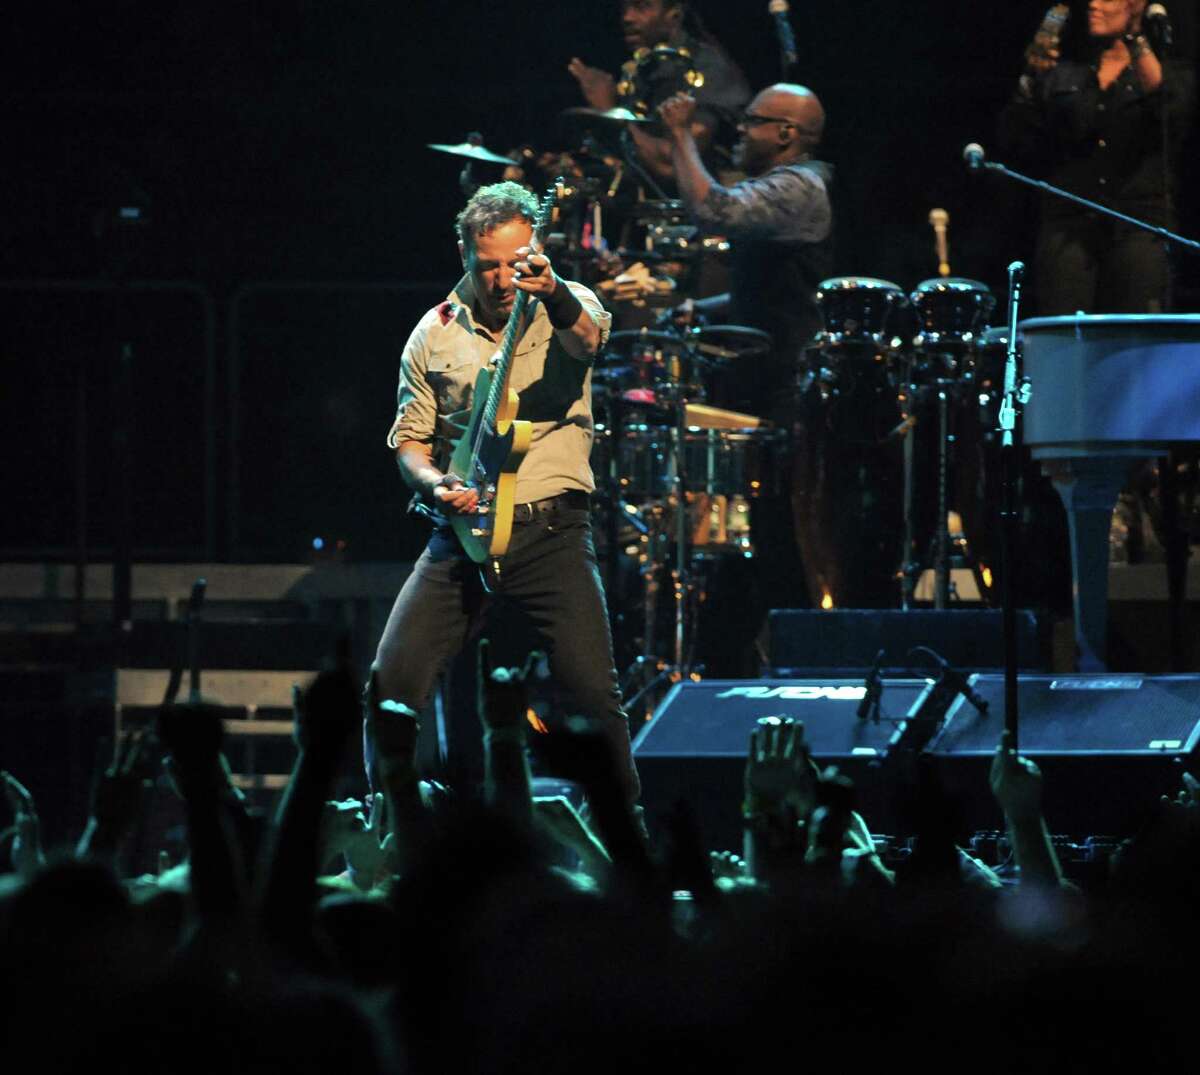 Bruce Springsteen and The E Street Band perform at the Times Union Center on Tuesday May 13, 2014 in Albany, N.Y. (Michael P. Farrell/Times Union)